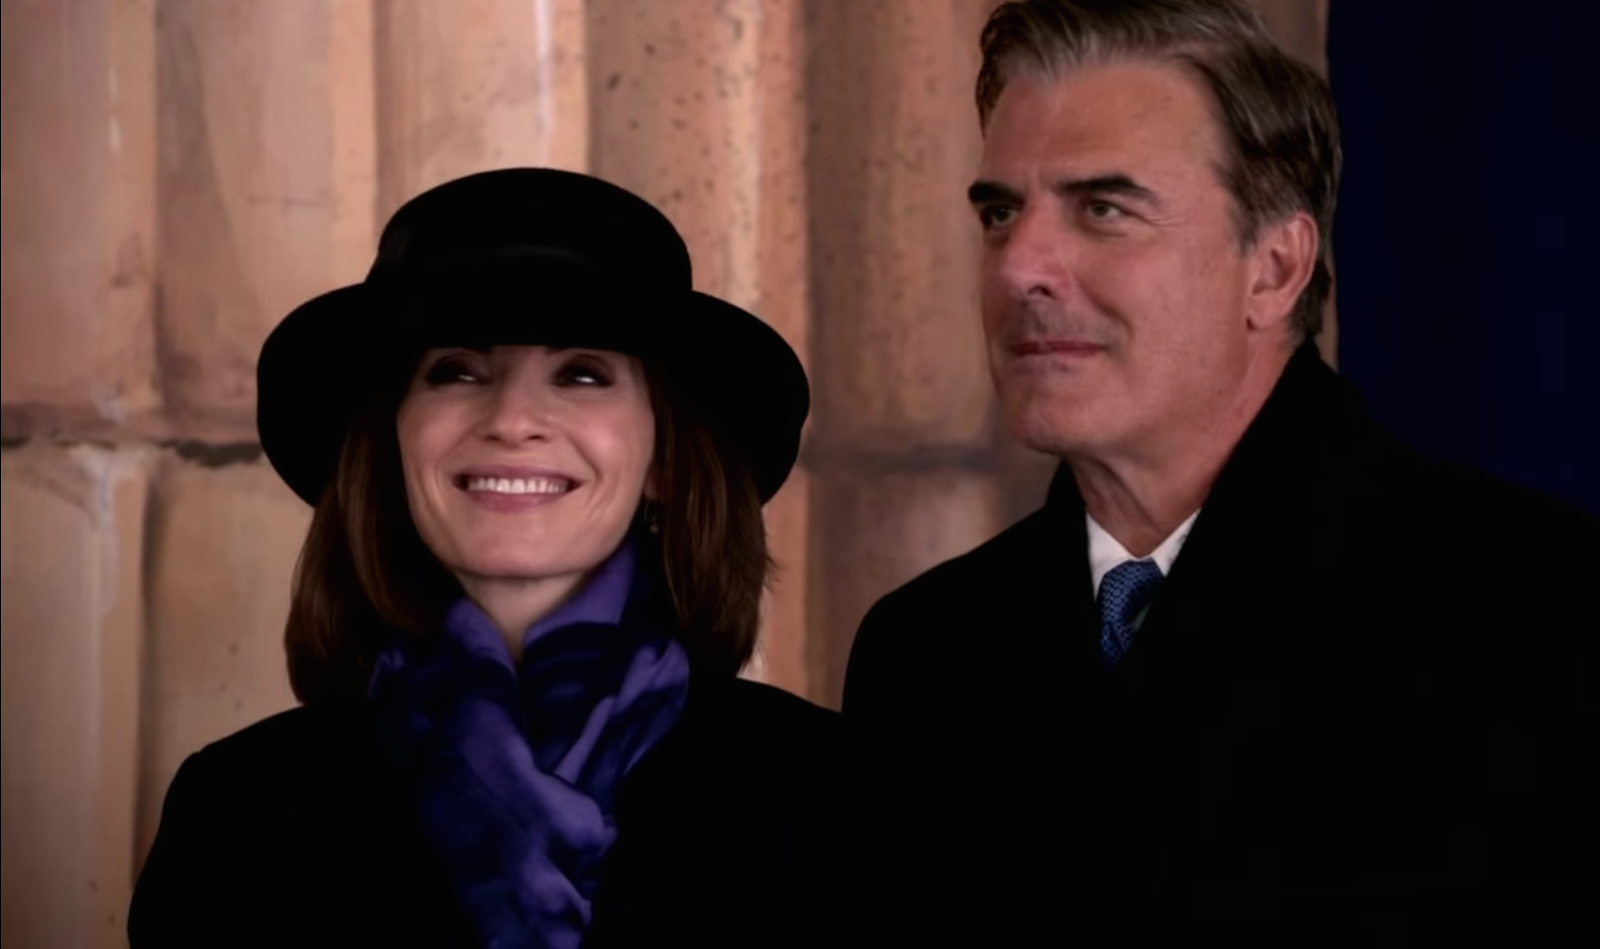 The Good Wife - Lies - Review: "Are You Recording Me?"